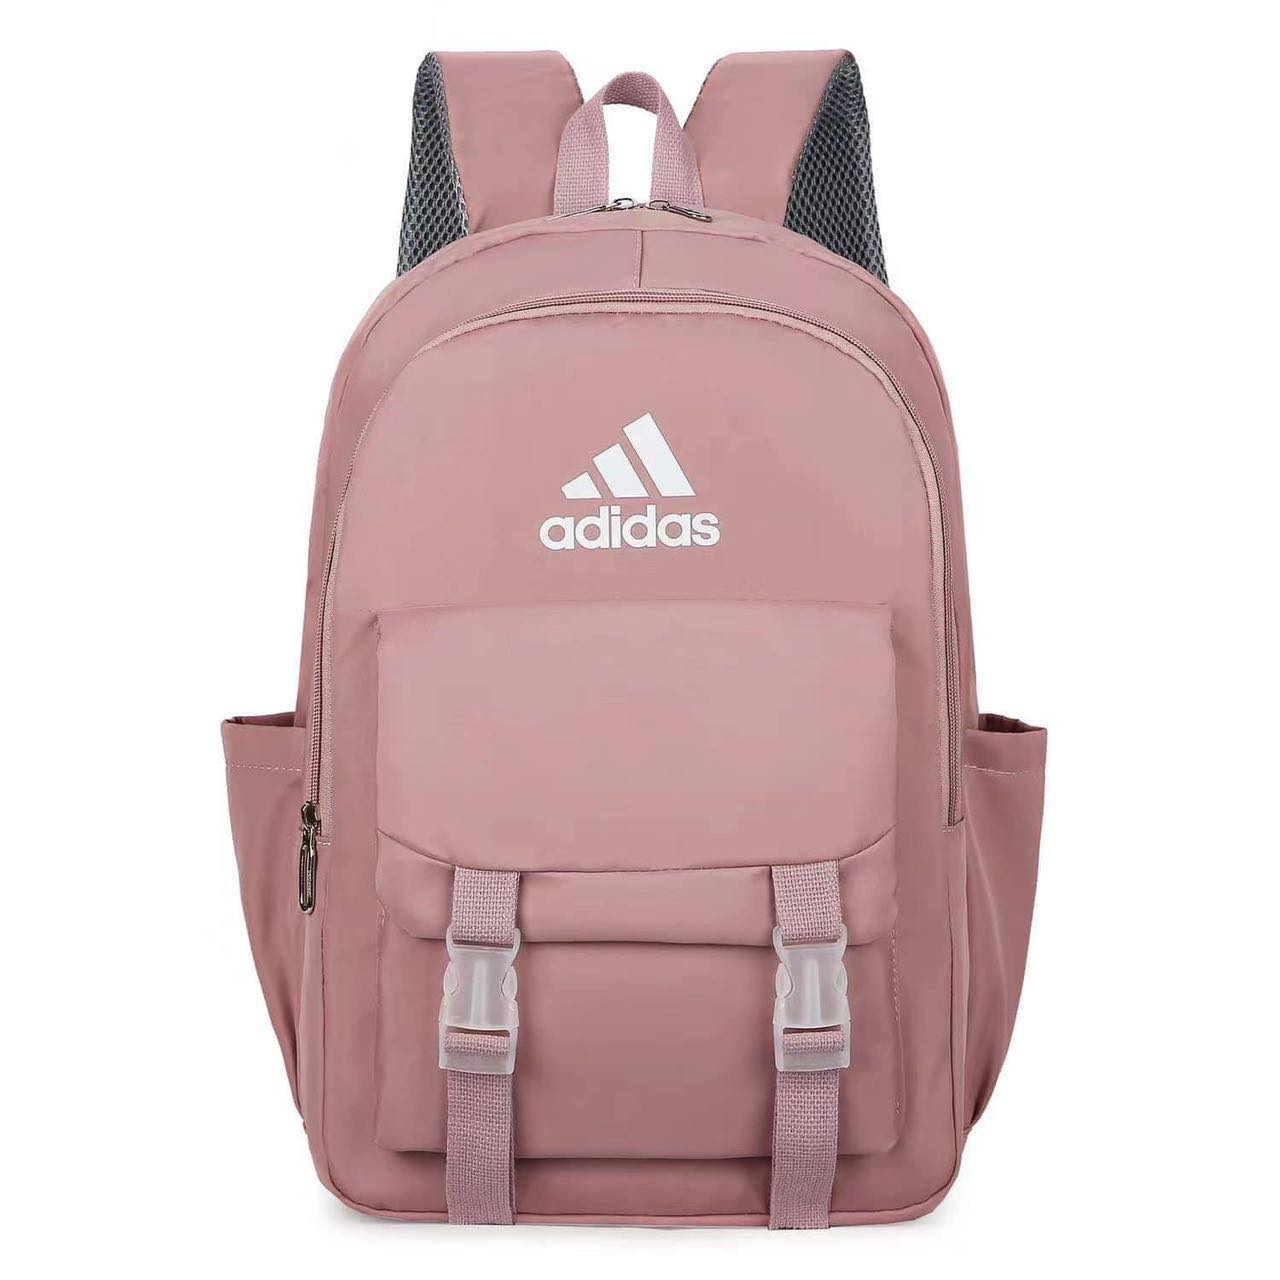 Clear and mesh backpacks: Shop picks from Pottery Barn Kids, Amazon and  more - Good Morning America